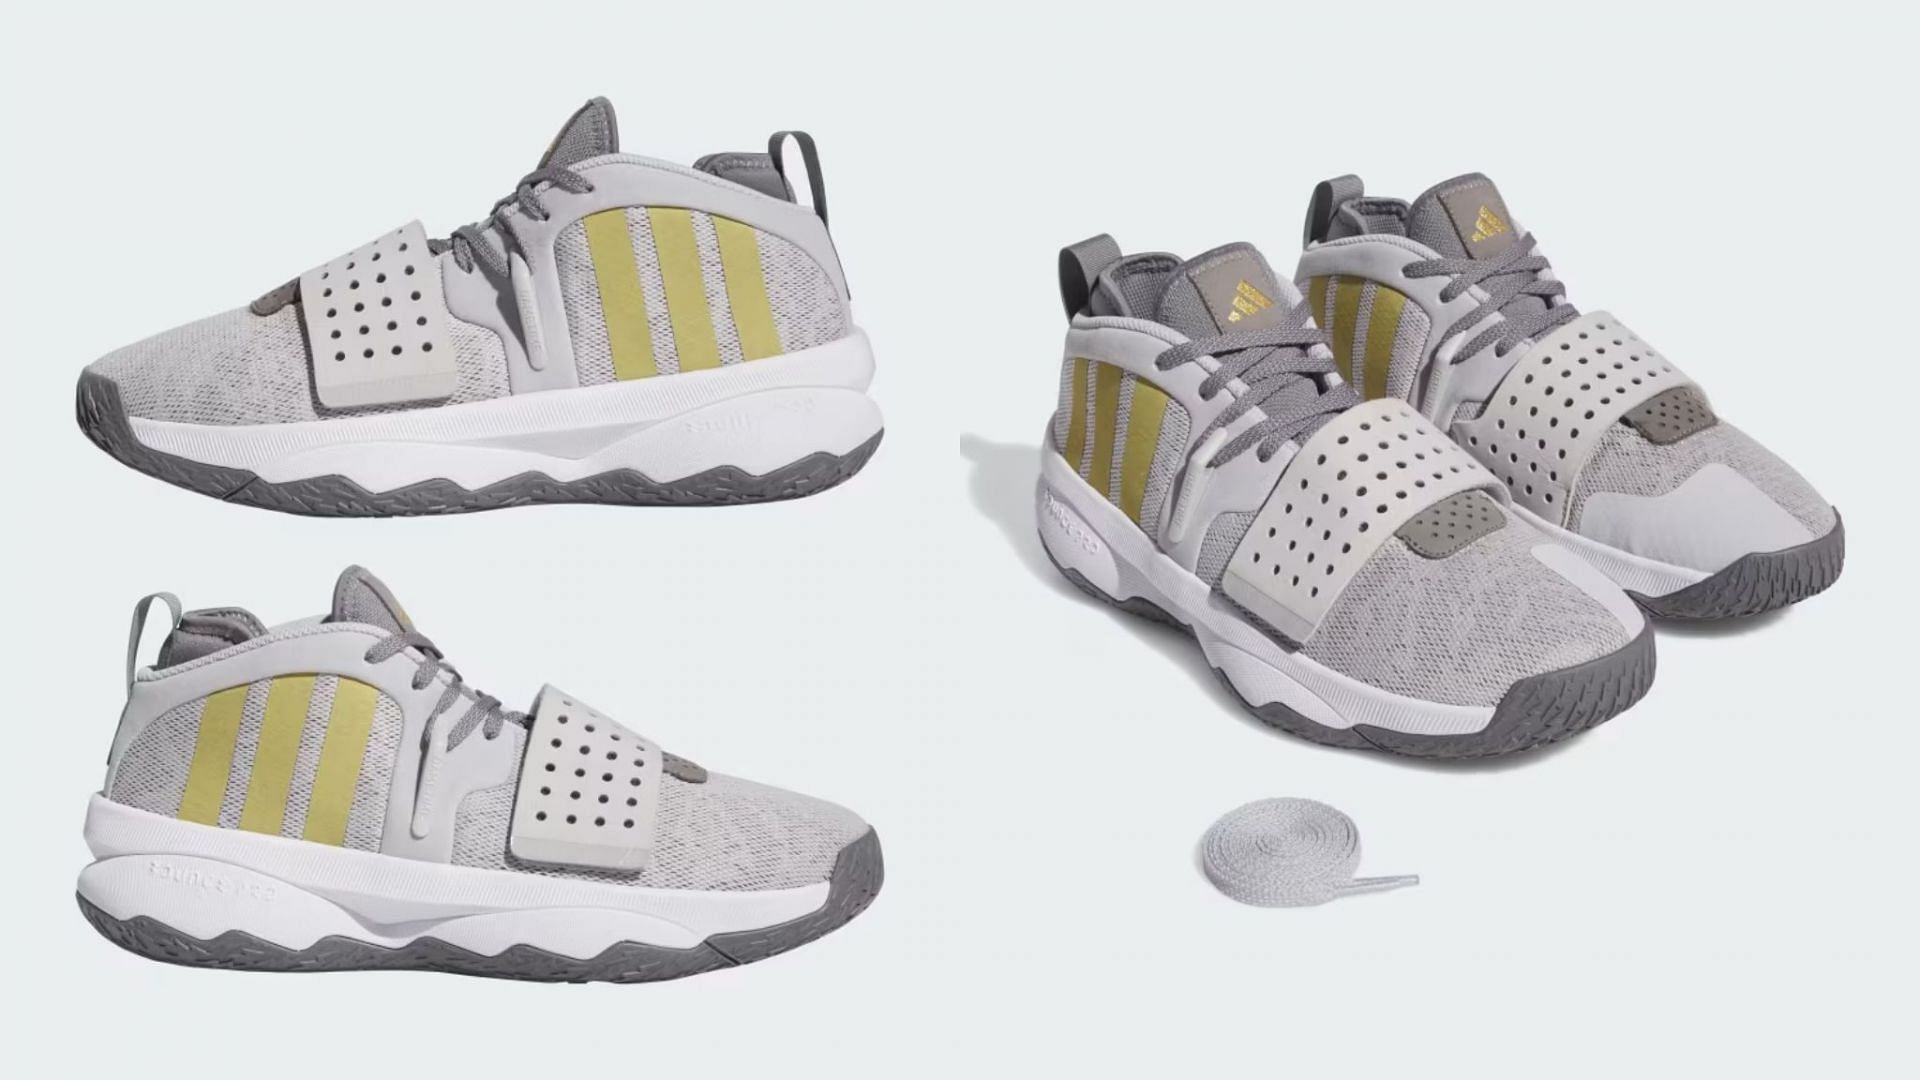 Primarily using gray, the new colorway incorporates the &quot;gold metallic&quot; tongue tab and three stripes.